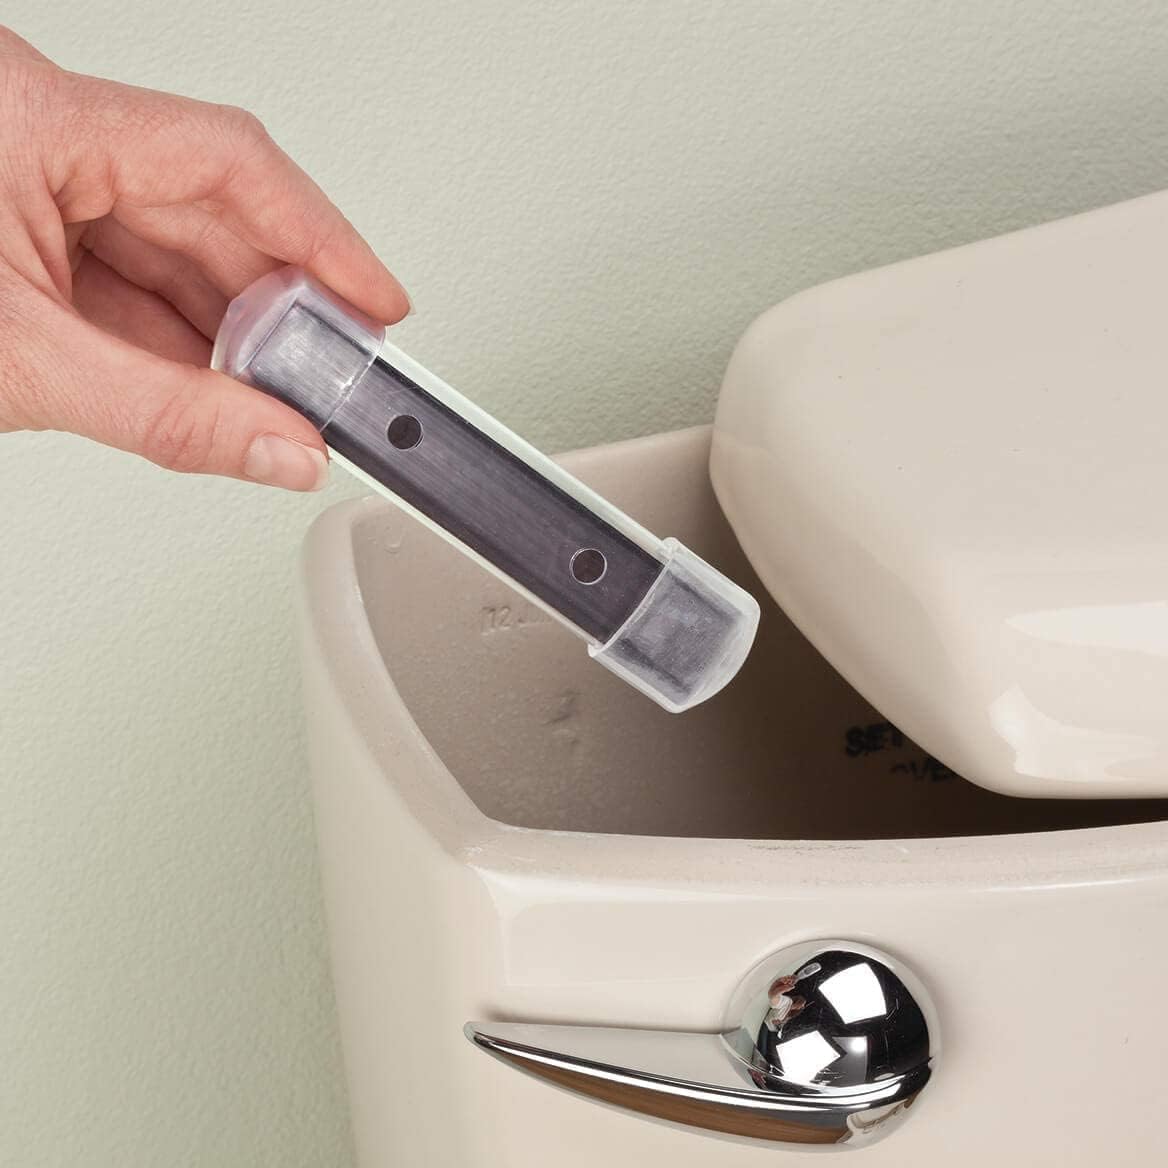 A hand drops a Bandwagon-Inc-Toilet-Cleaning-Magnet into a toilet tank.